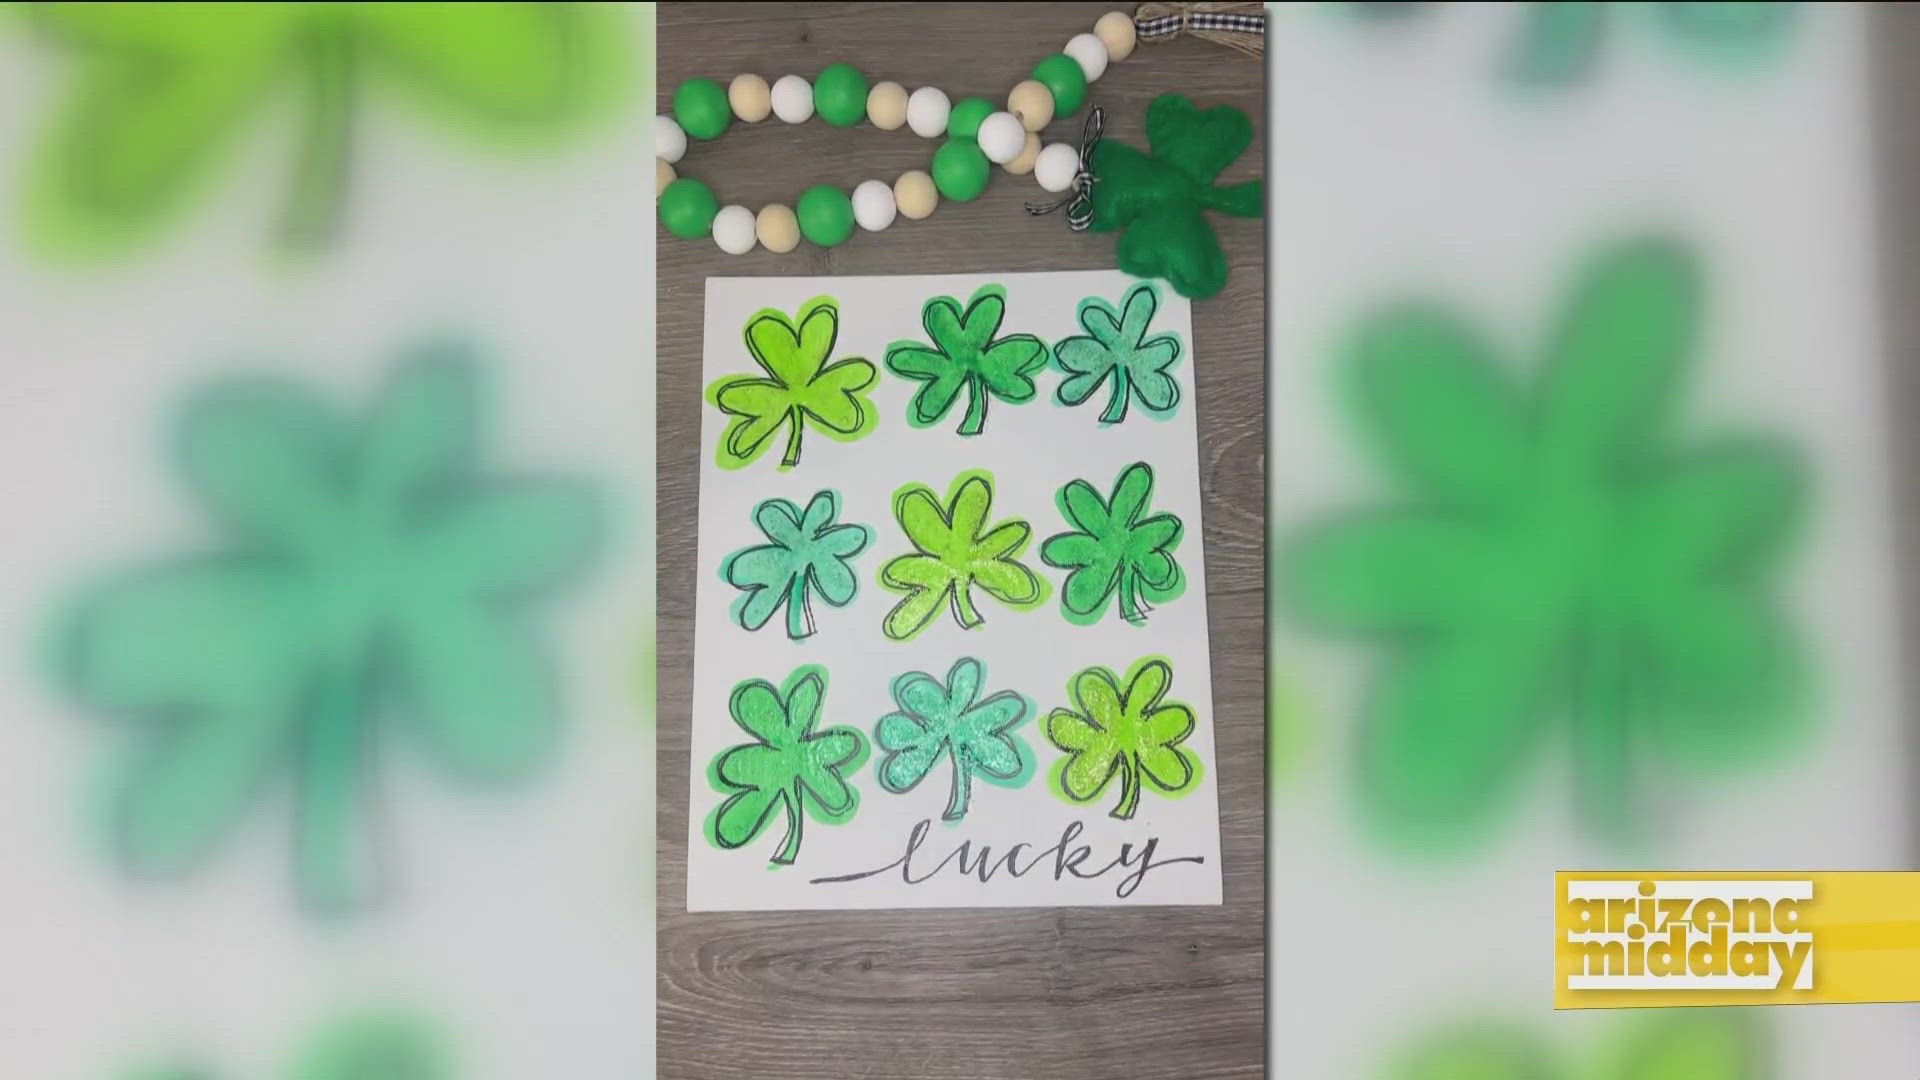 Amy Latta shows us how to get in the St. Patrick’s Day spirit with some easy crafts that are perfect for the whole family.